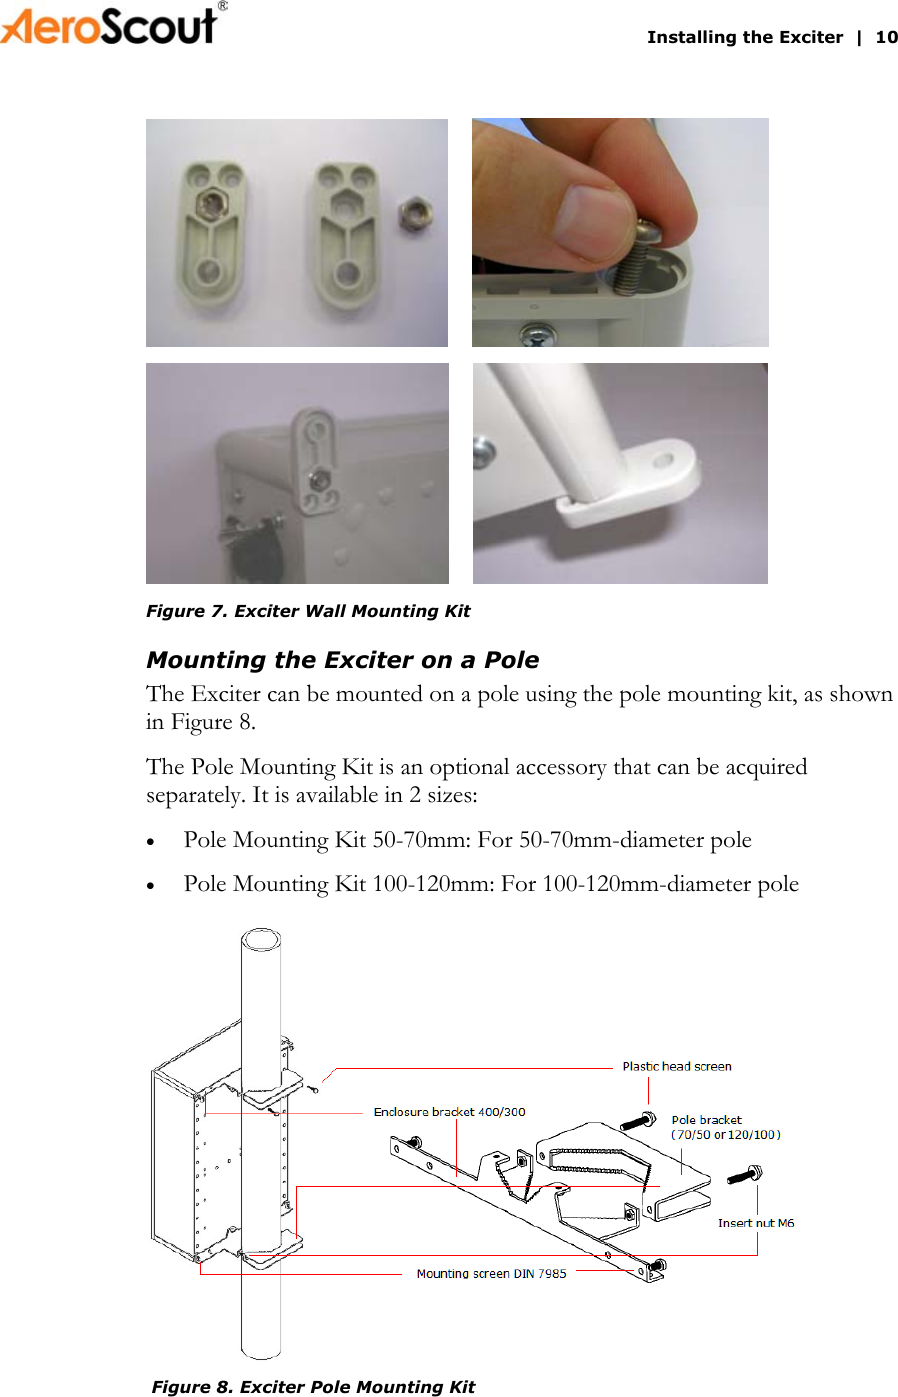       Installing the Exciter  |  10             Figure 7. Exciter Wall Mounting Kit Mounting the Exciter on a Pole The Exciter can be mounted on a pole using the pole mounting kit, as shown in Figure 8. The Pole Mounting Kit is an optional accessory that can be acquired separately. It is available in 2 sizes: Pole Mounting Kit 50-70mm: For 50-70mm-diameter pole • •  Pole Mounting Kit 100-120mm: For 100-120mm-diameter pole   Figure 8. Exciter Pole Mounting Kit 